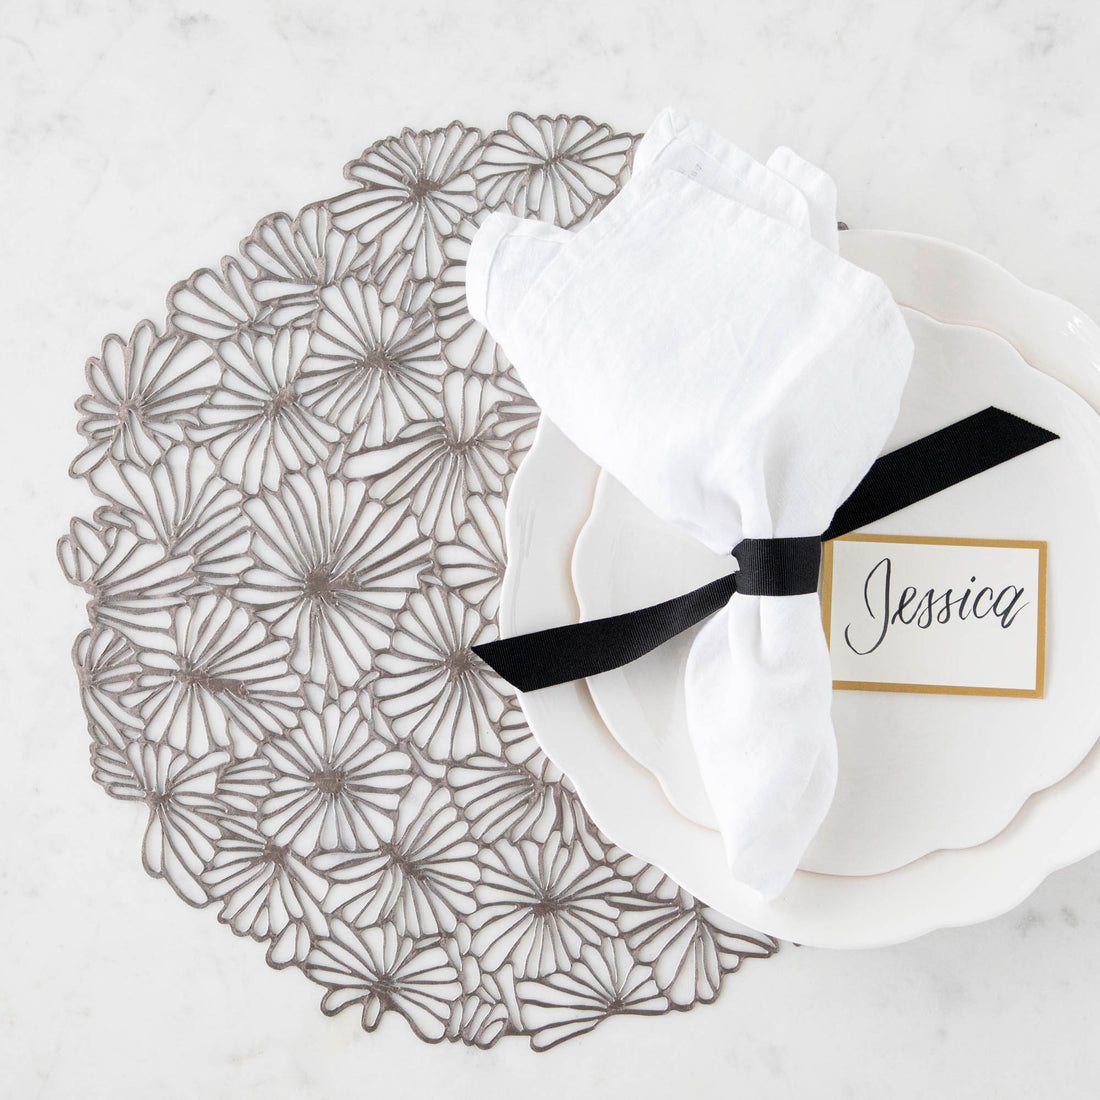 Elegant table setting with a decorative Chilewich Pressed Daisy Mat charger placemat, white porcelain dishes, a folded napkin, and a name card for Jessica.